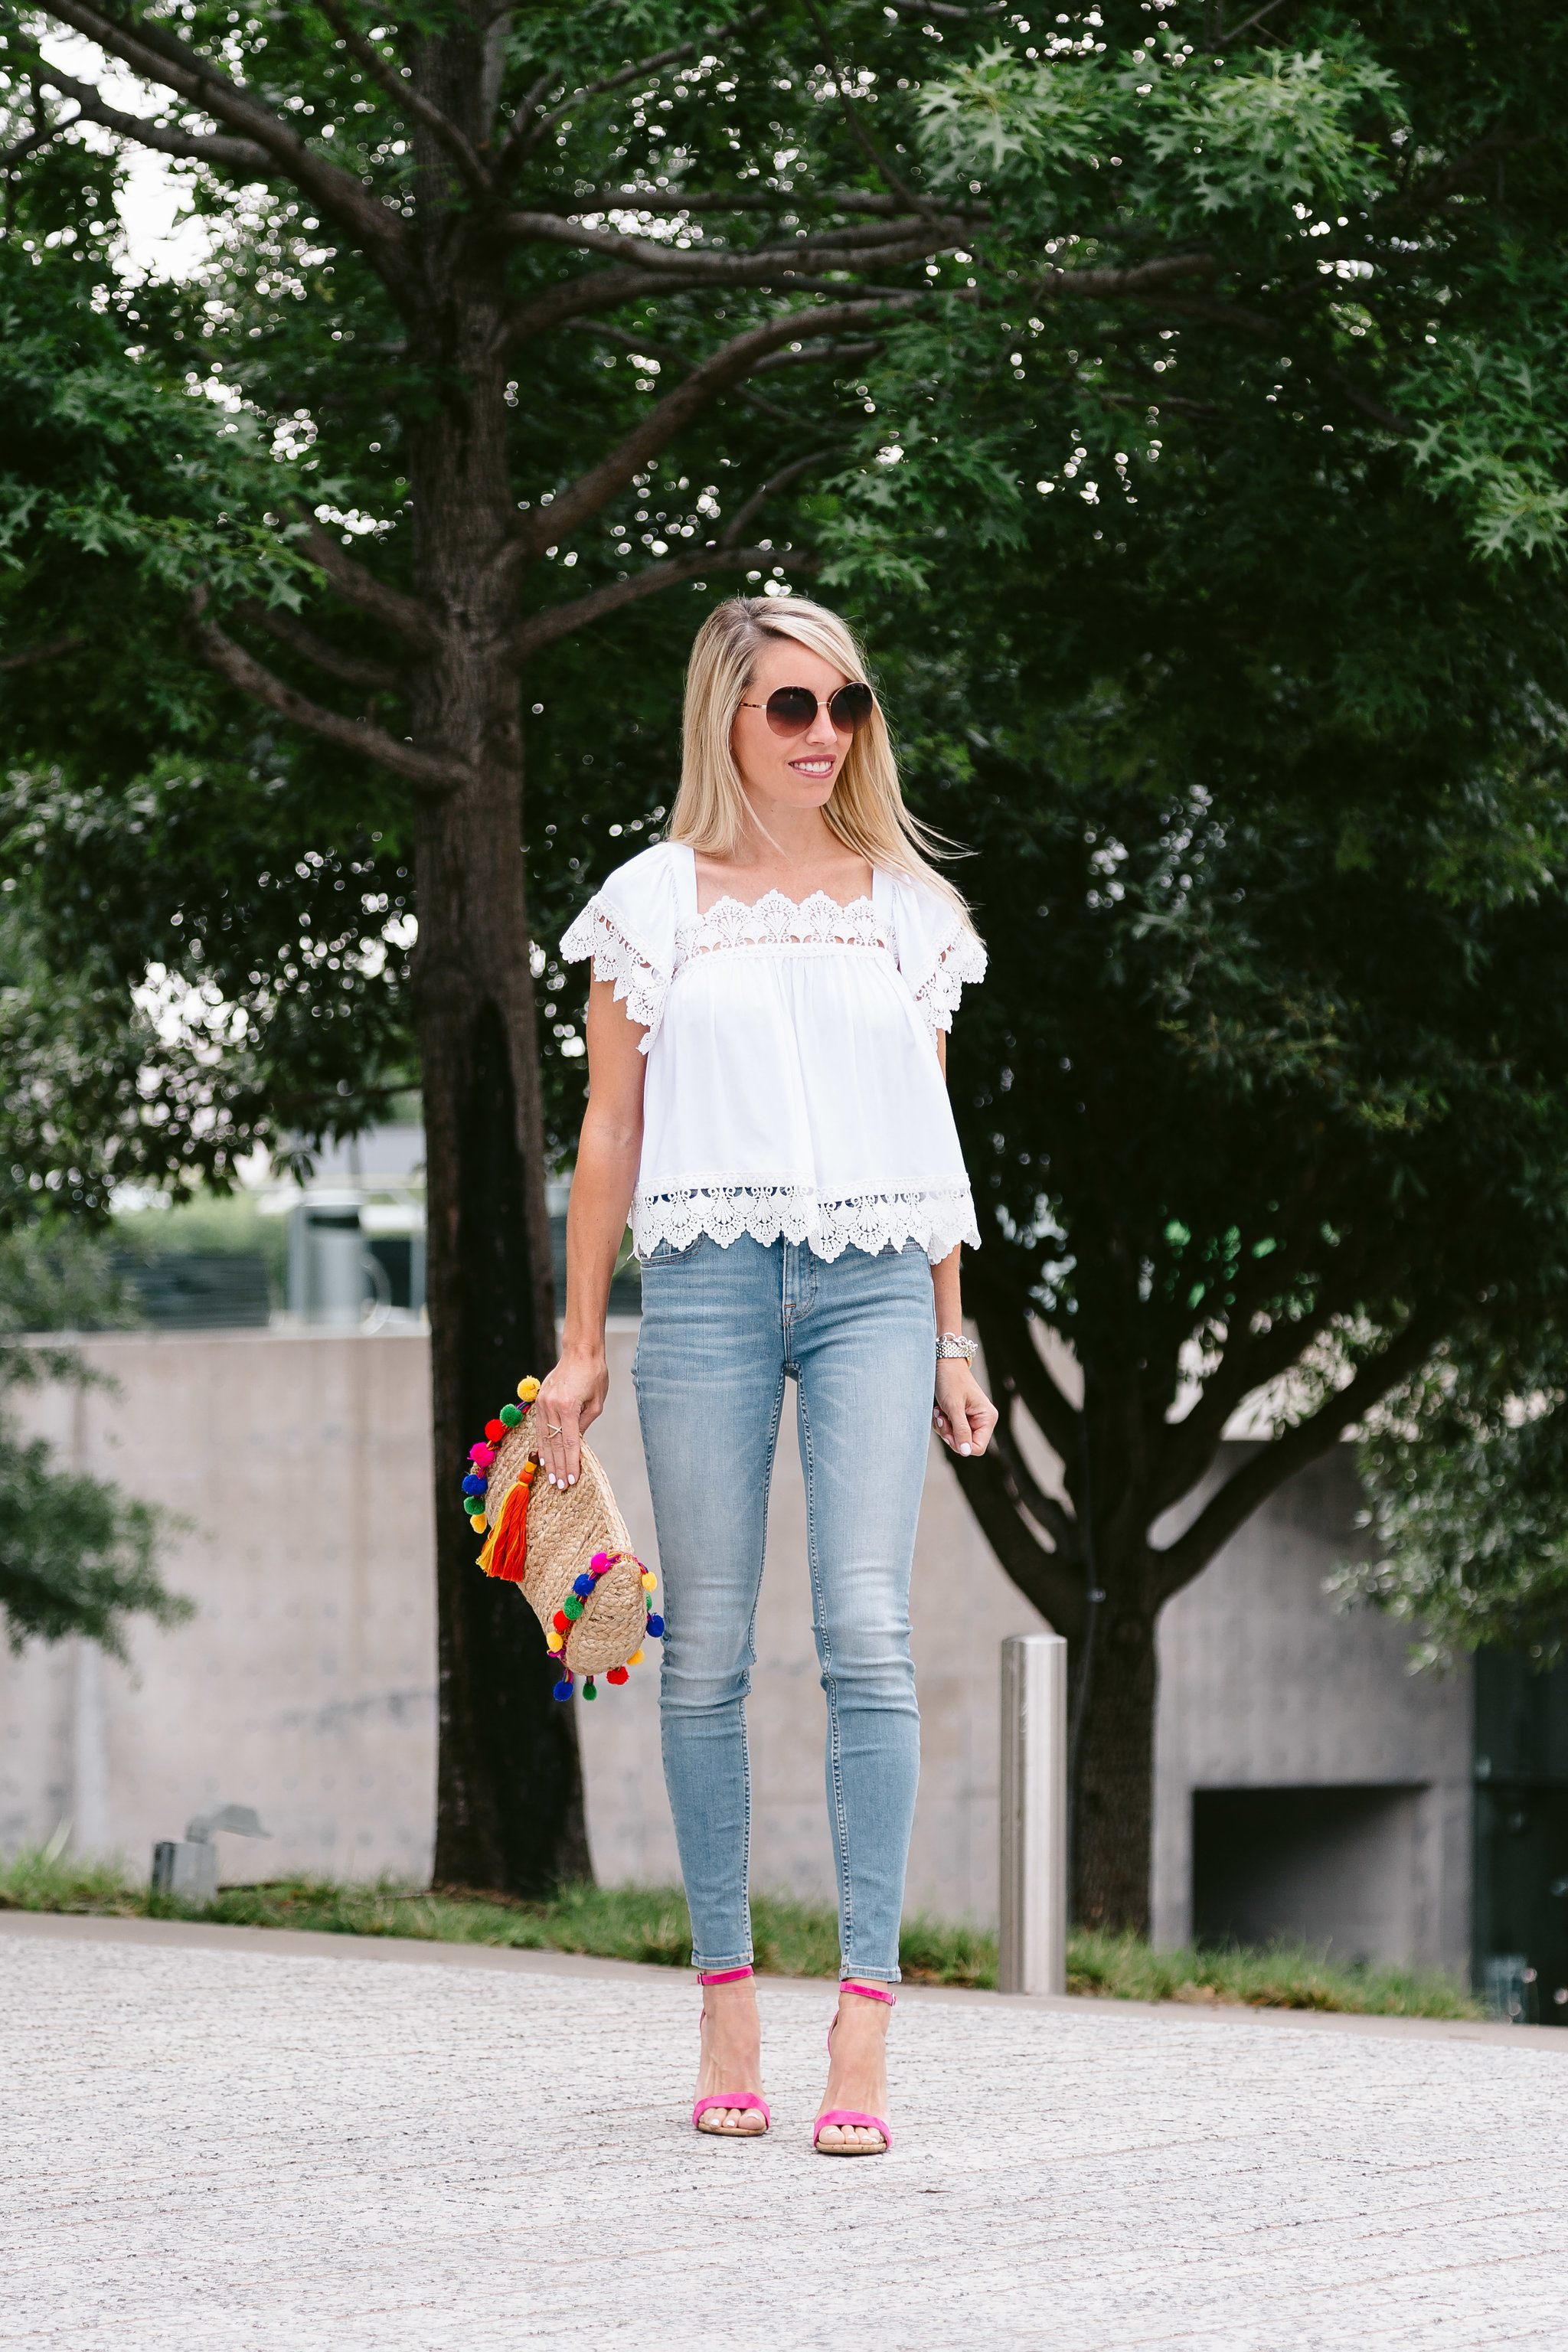 3 Way To Wear White Summer Tops - The 